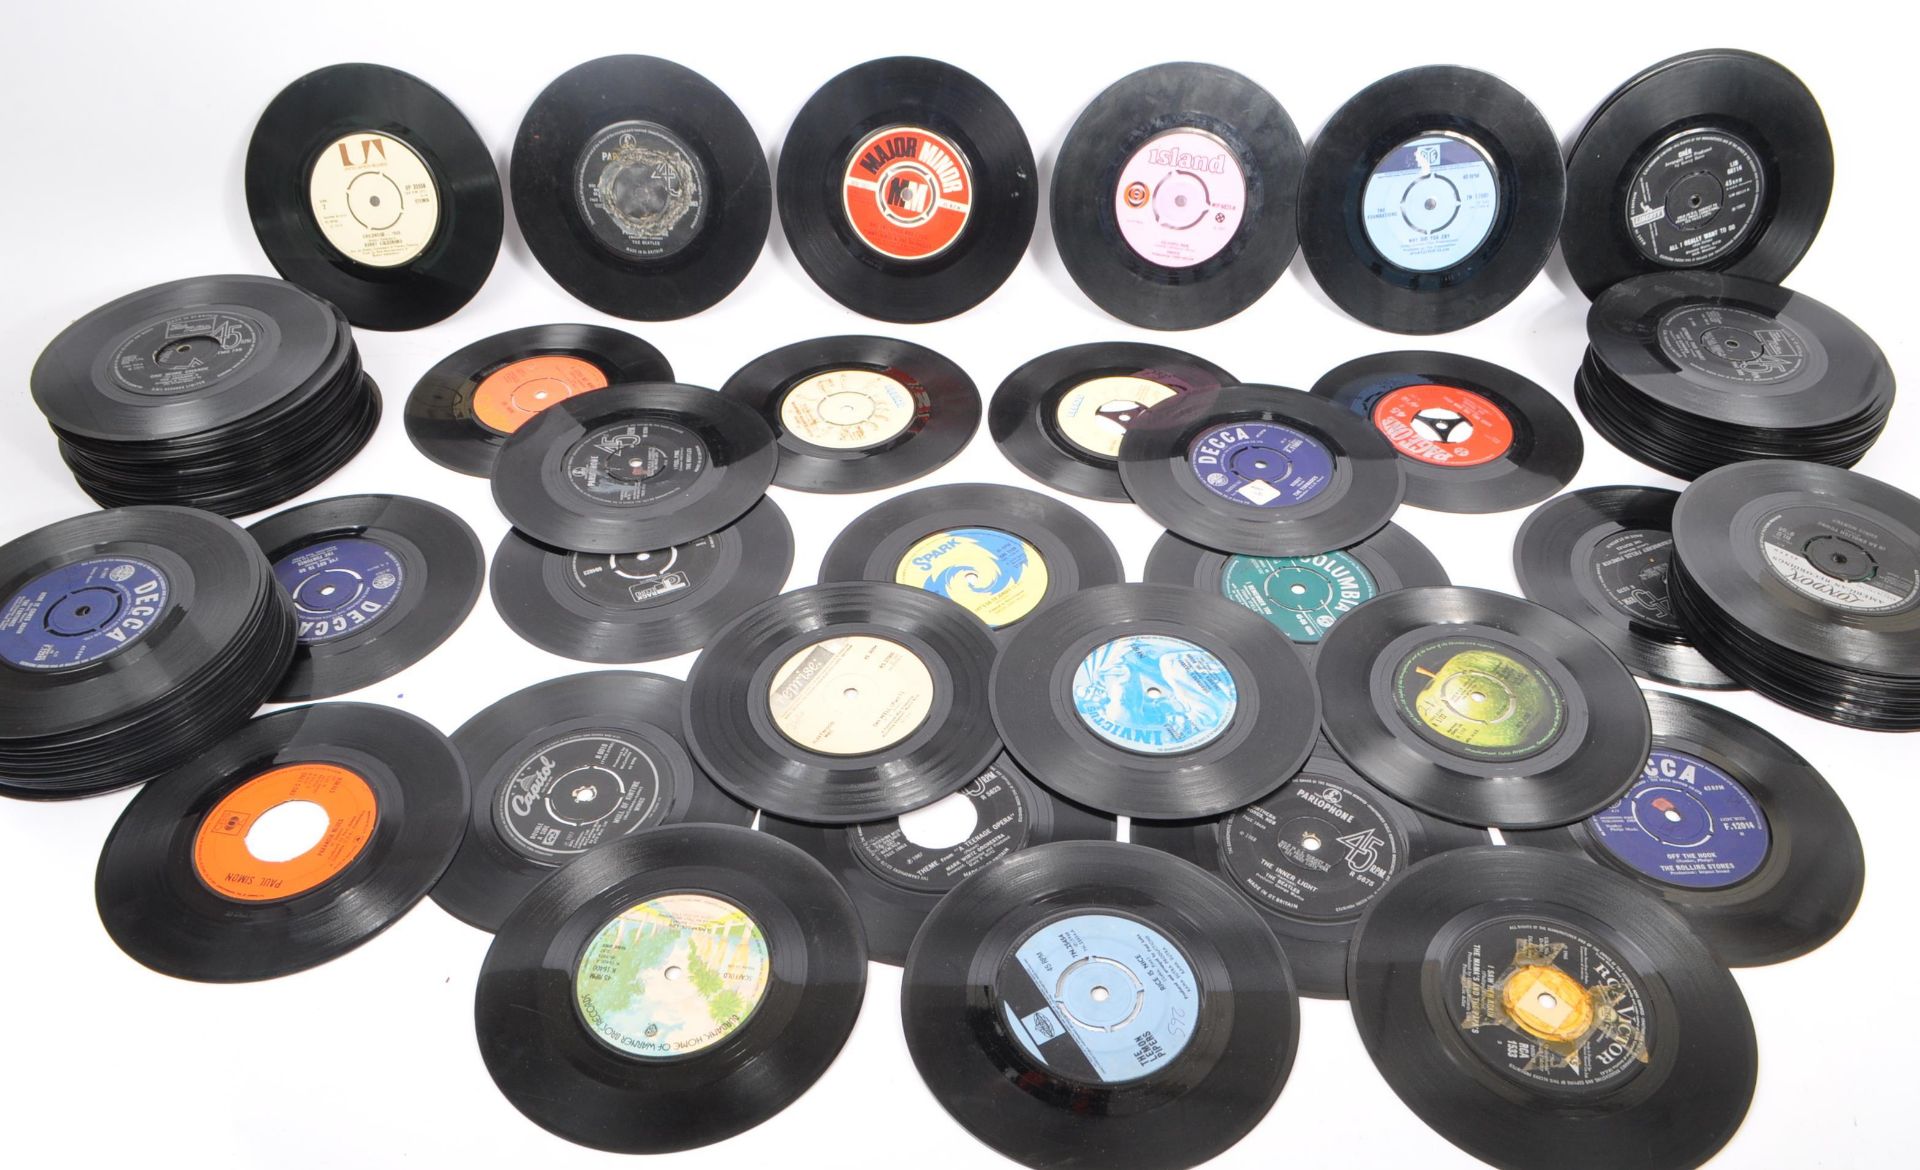 COLLECTION OF LATER 20TH CENTURY 45 RPM VINYL SINGLE RECORDS